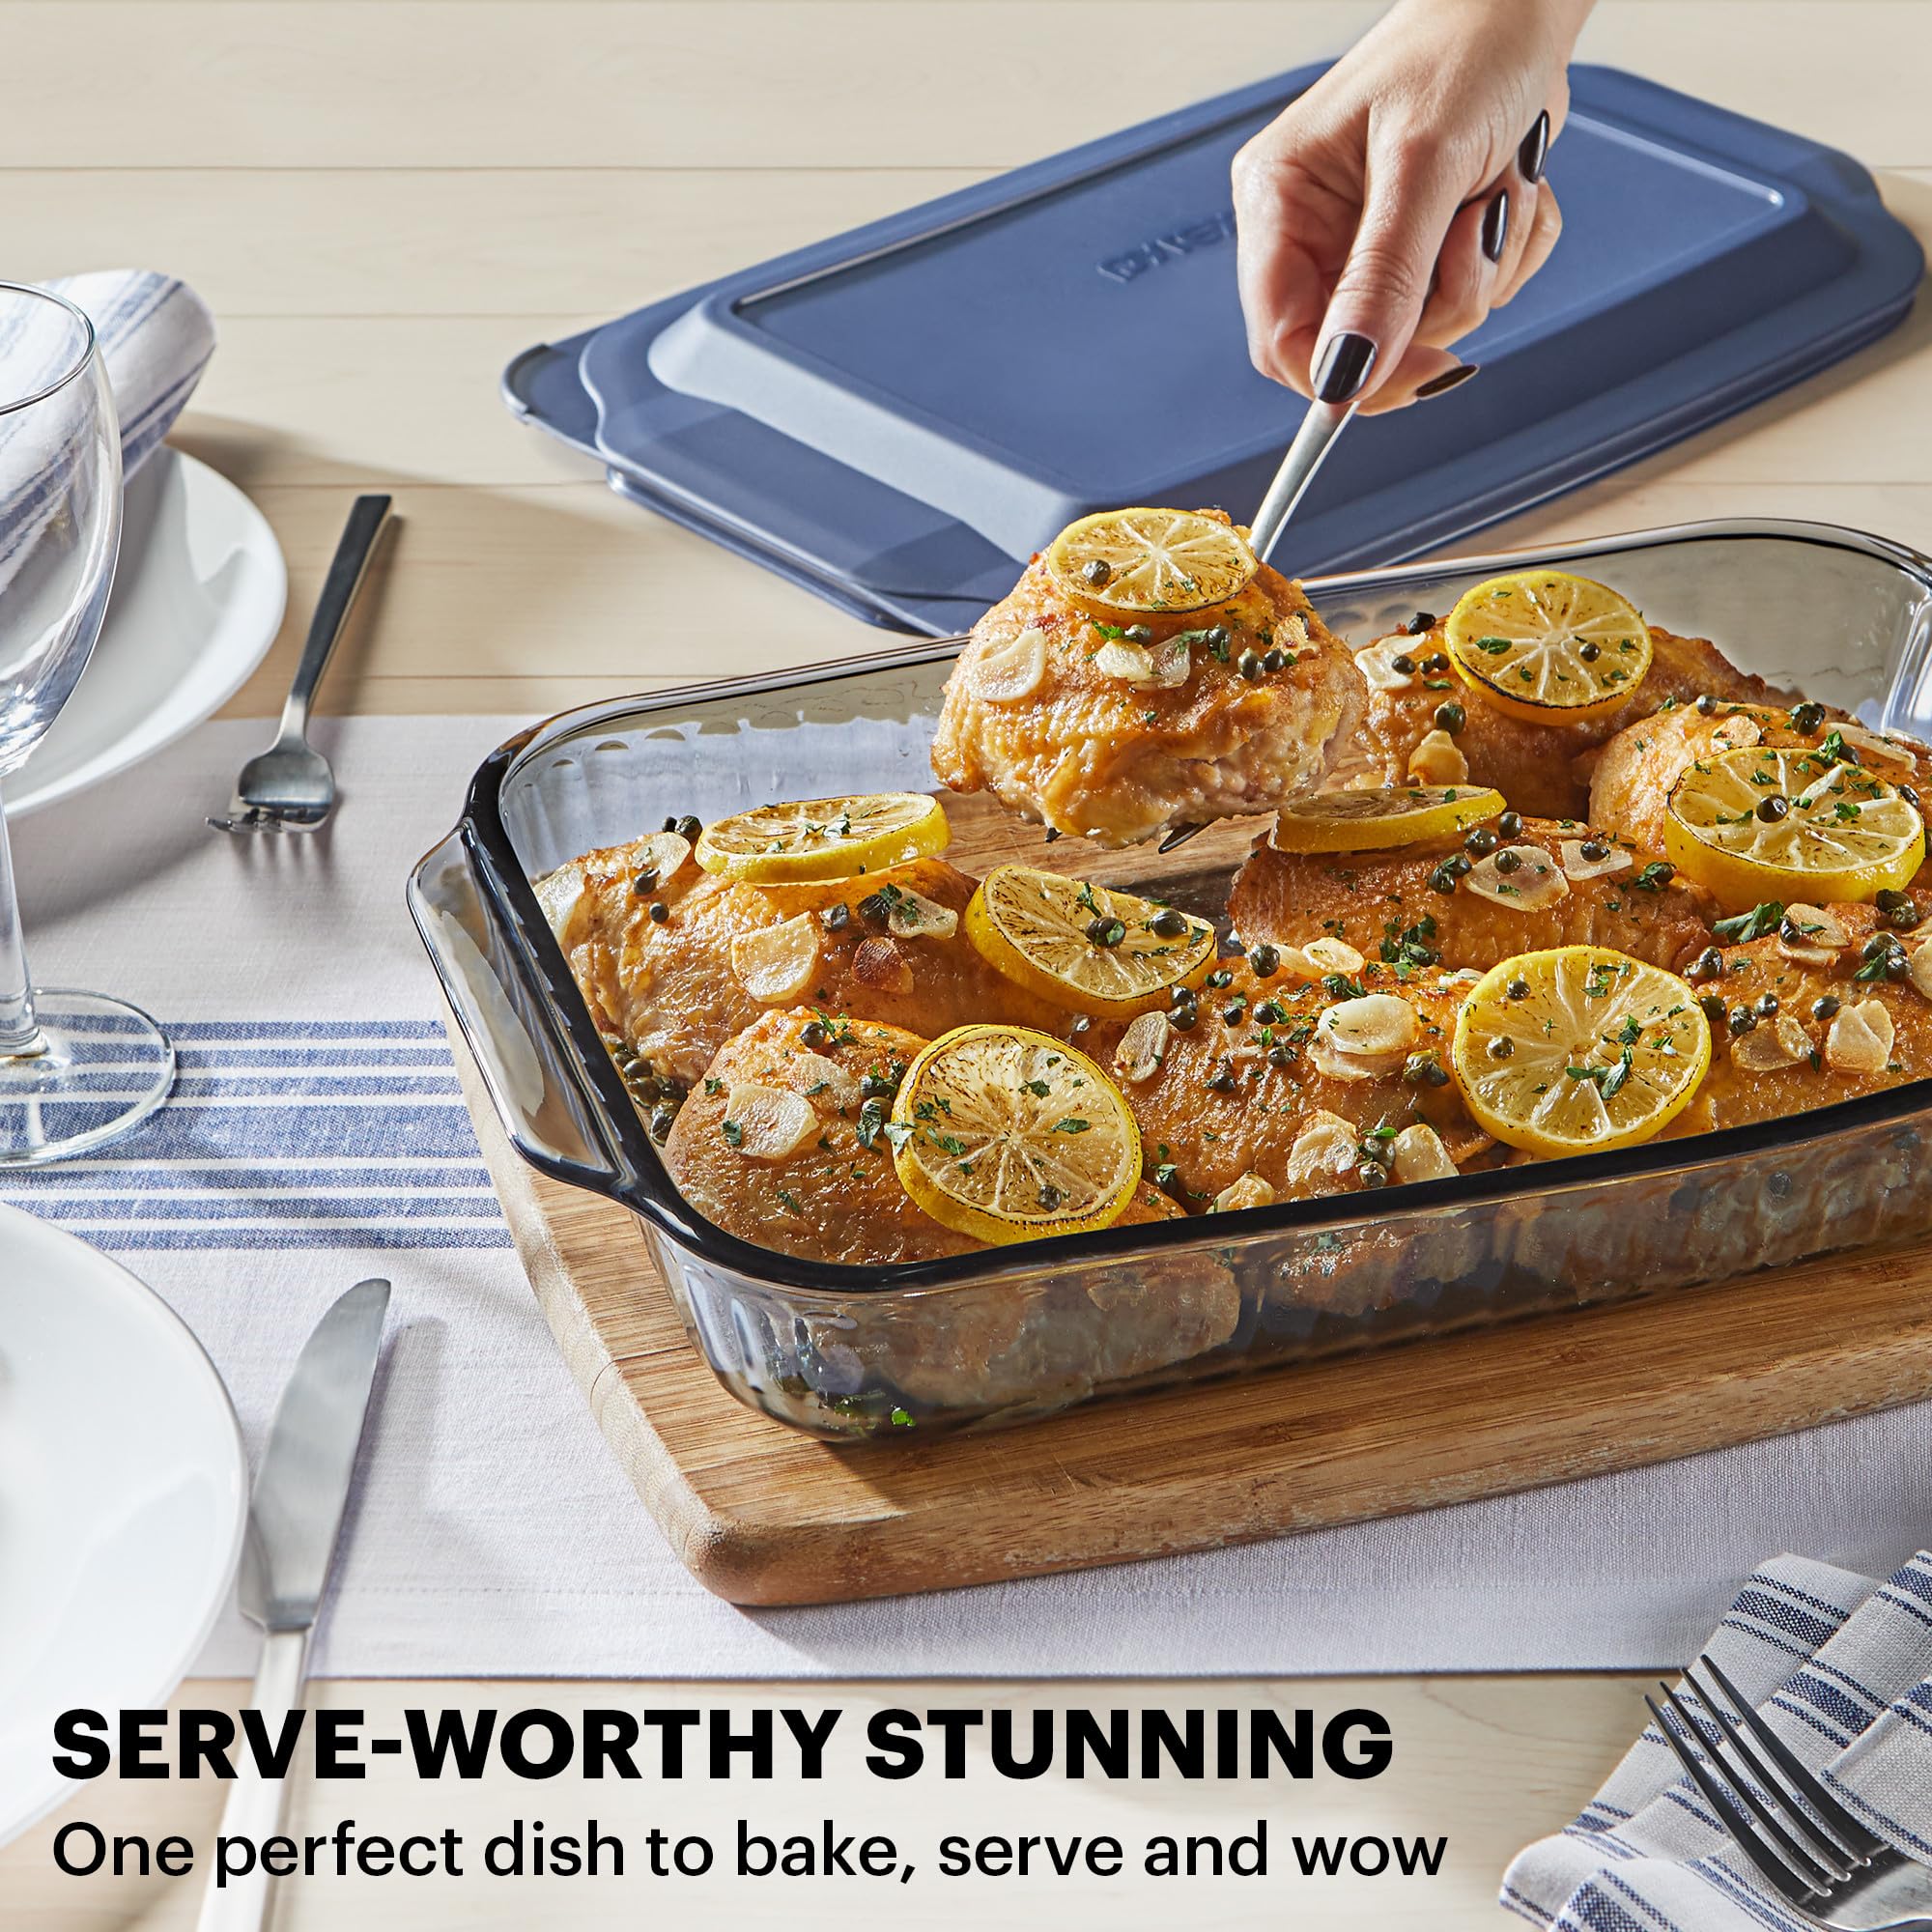 Pyrex Sculpted Tinted (4-PC Full Set) Glass Baking Dish with BPA-Free Lid, Oblong Bakeware Glass Pan For Casserole & Lasagna, Dishwasher, Freezer, Microwave and Pre-Heated Oven Safe, Smoke